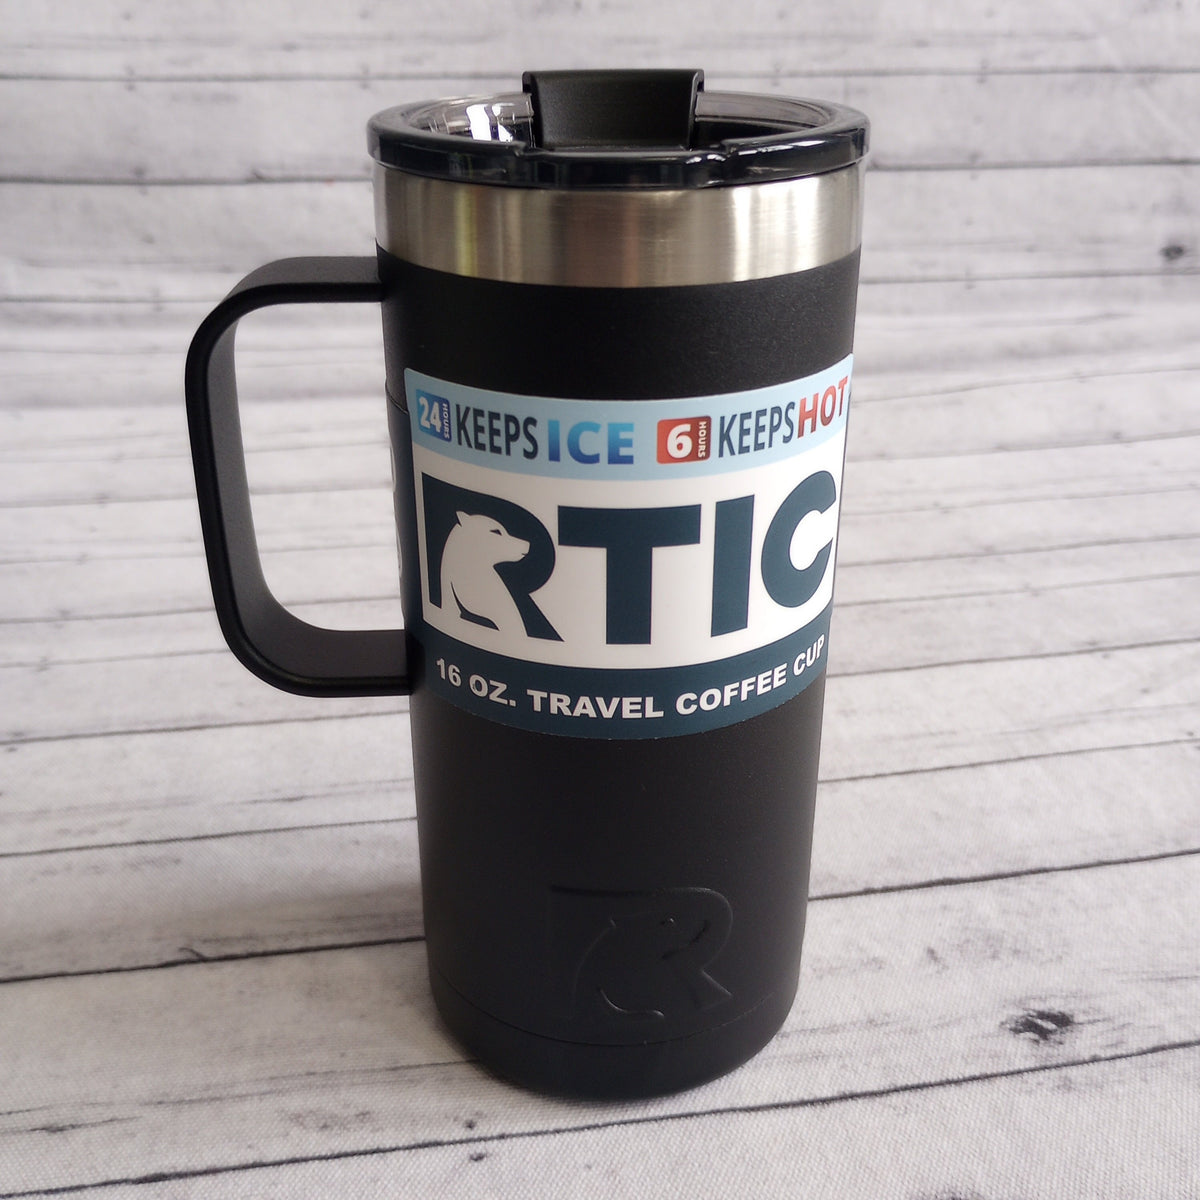 RTIC 16oz Travel Coffee Cup Review 